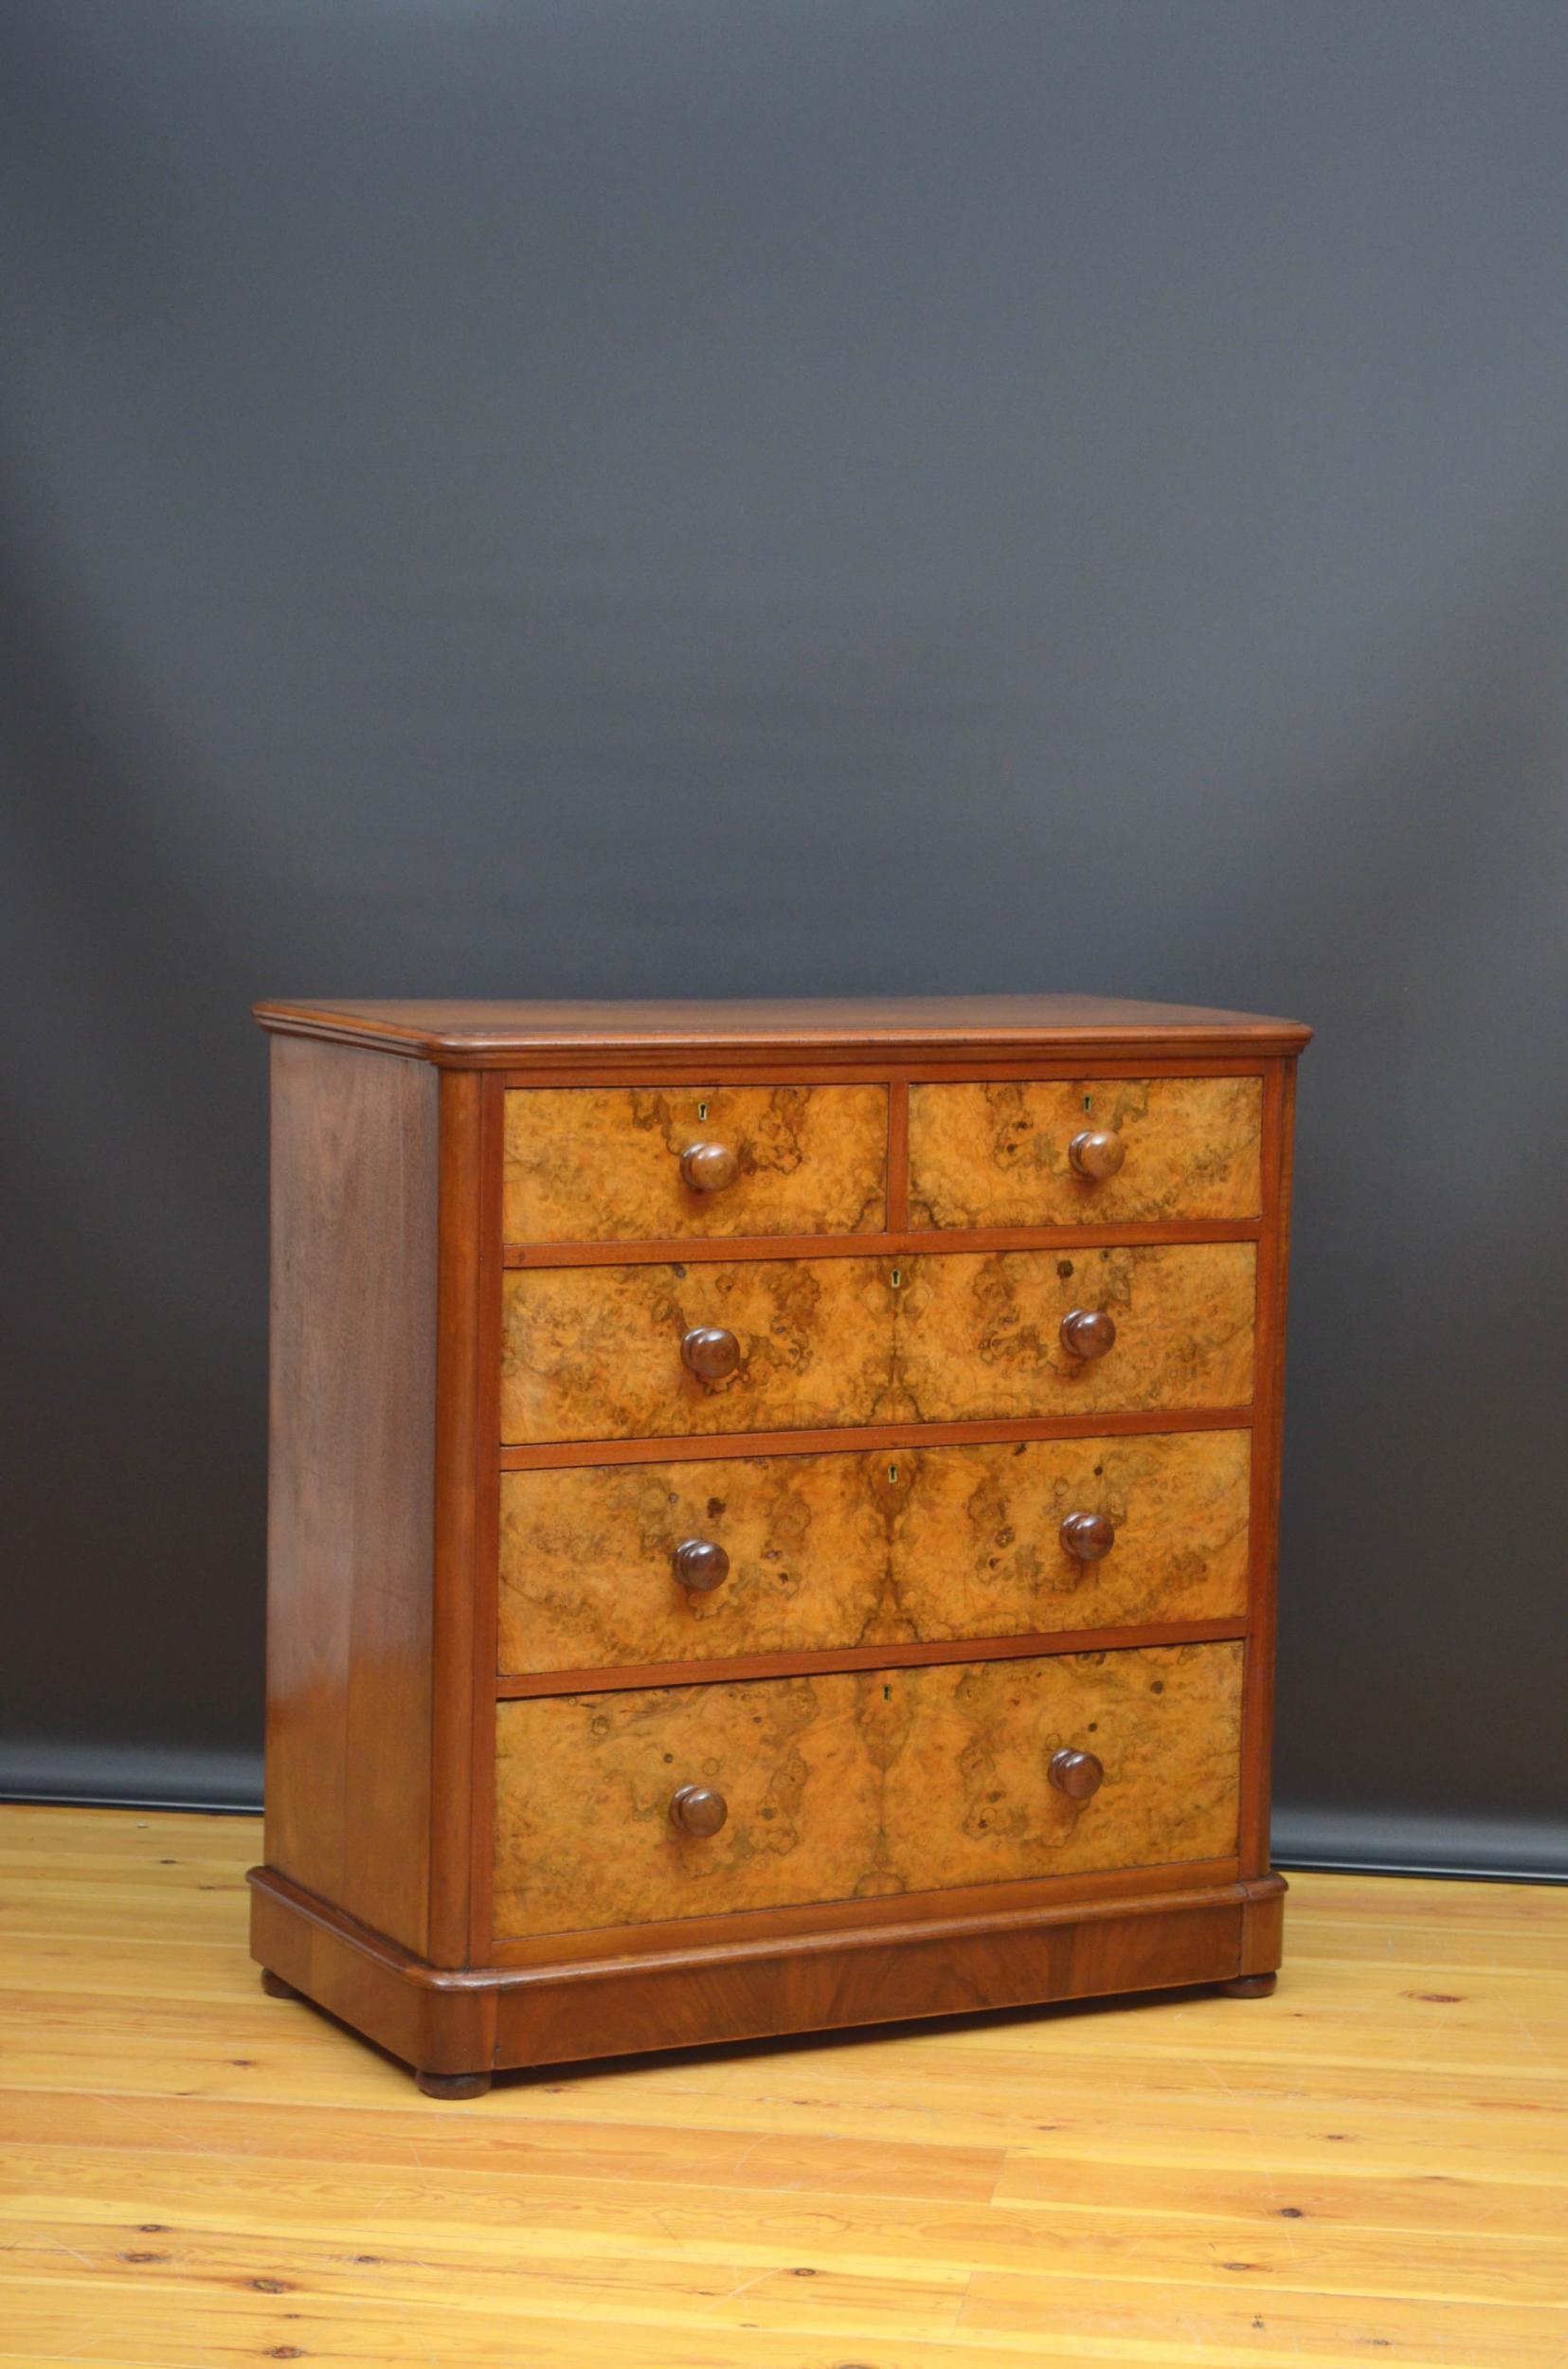 Sn4973, attractive Victorian figured and burr walnut chest of drawers of rounded shoulder design, having figured walnut top with moulded edge above two short and two long mahogany lined burr walnut drawers, bottom drawer being a deep base drawer,